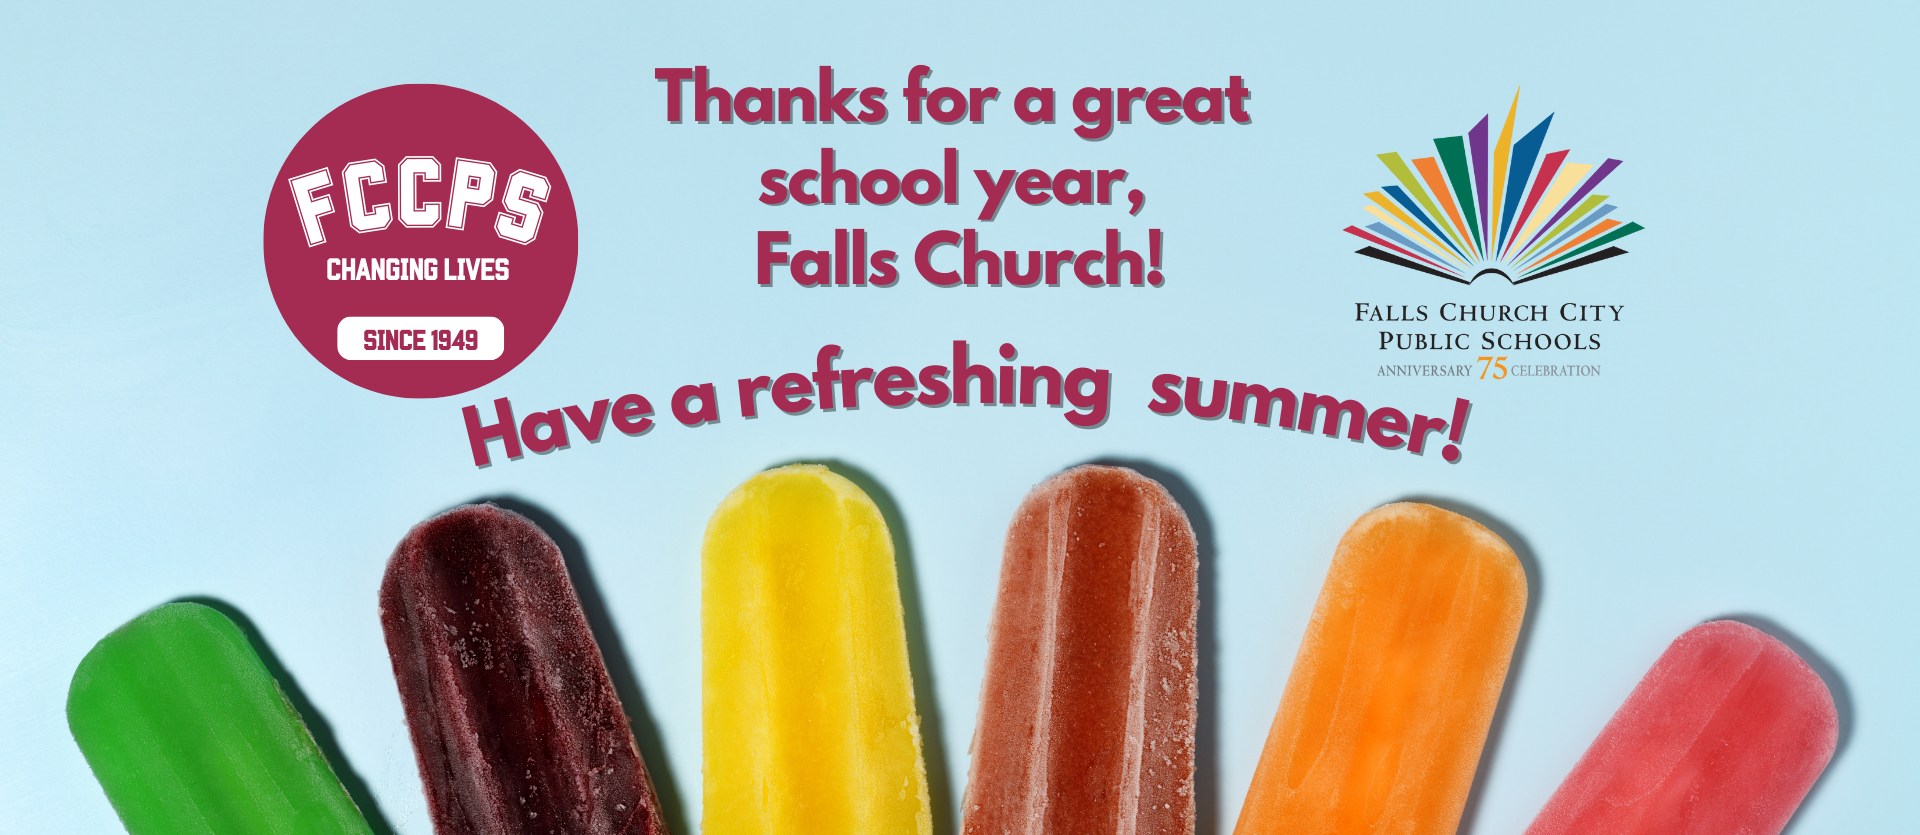 Thanks for a great school year, Falls Church! Have a refreshing summer!